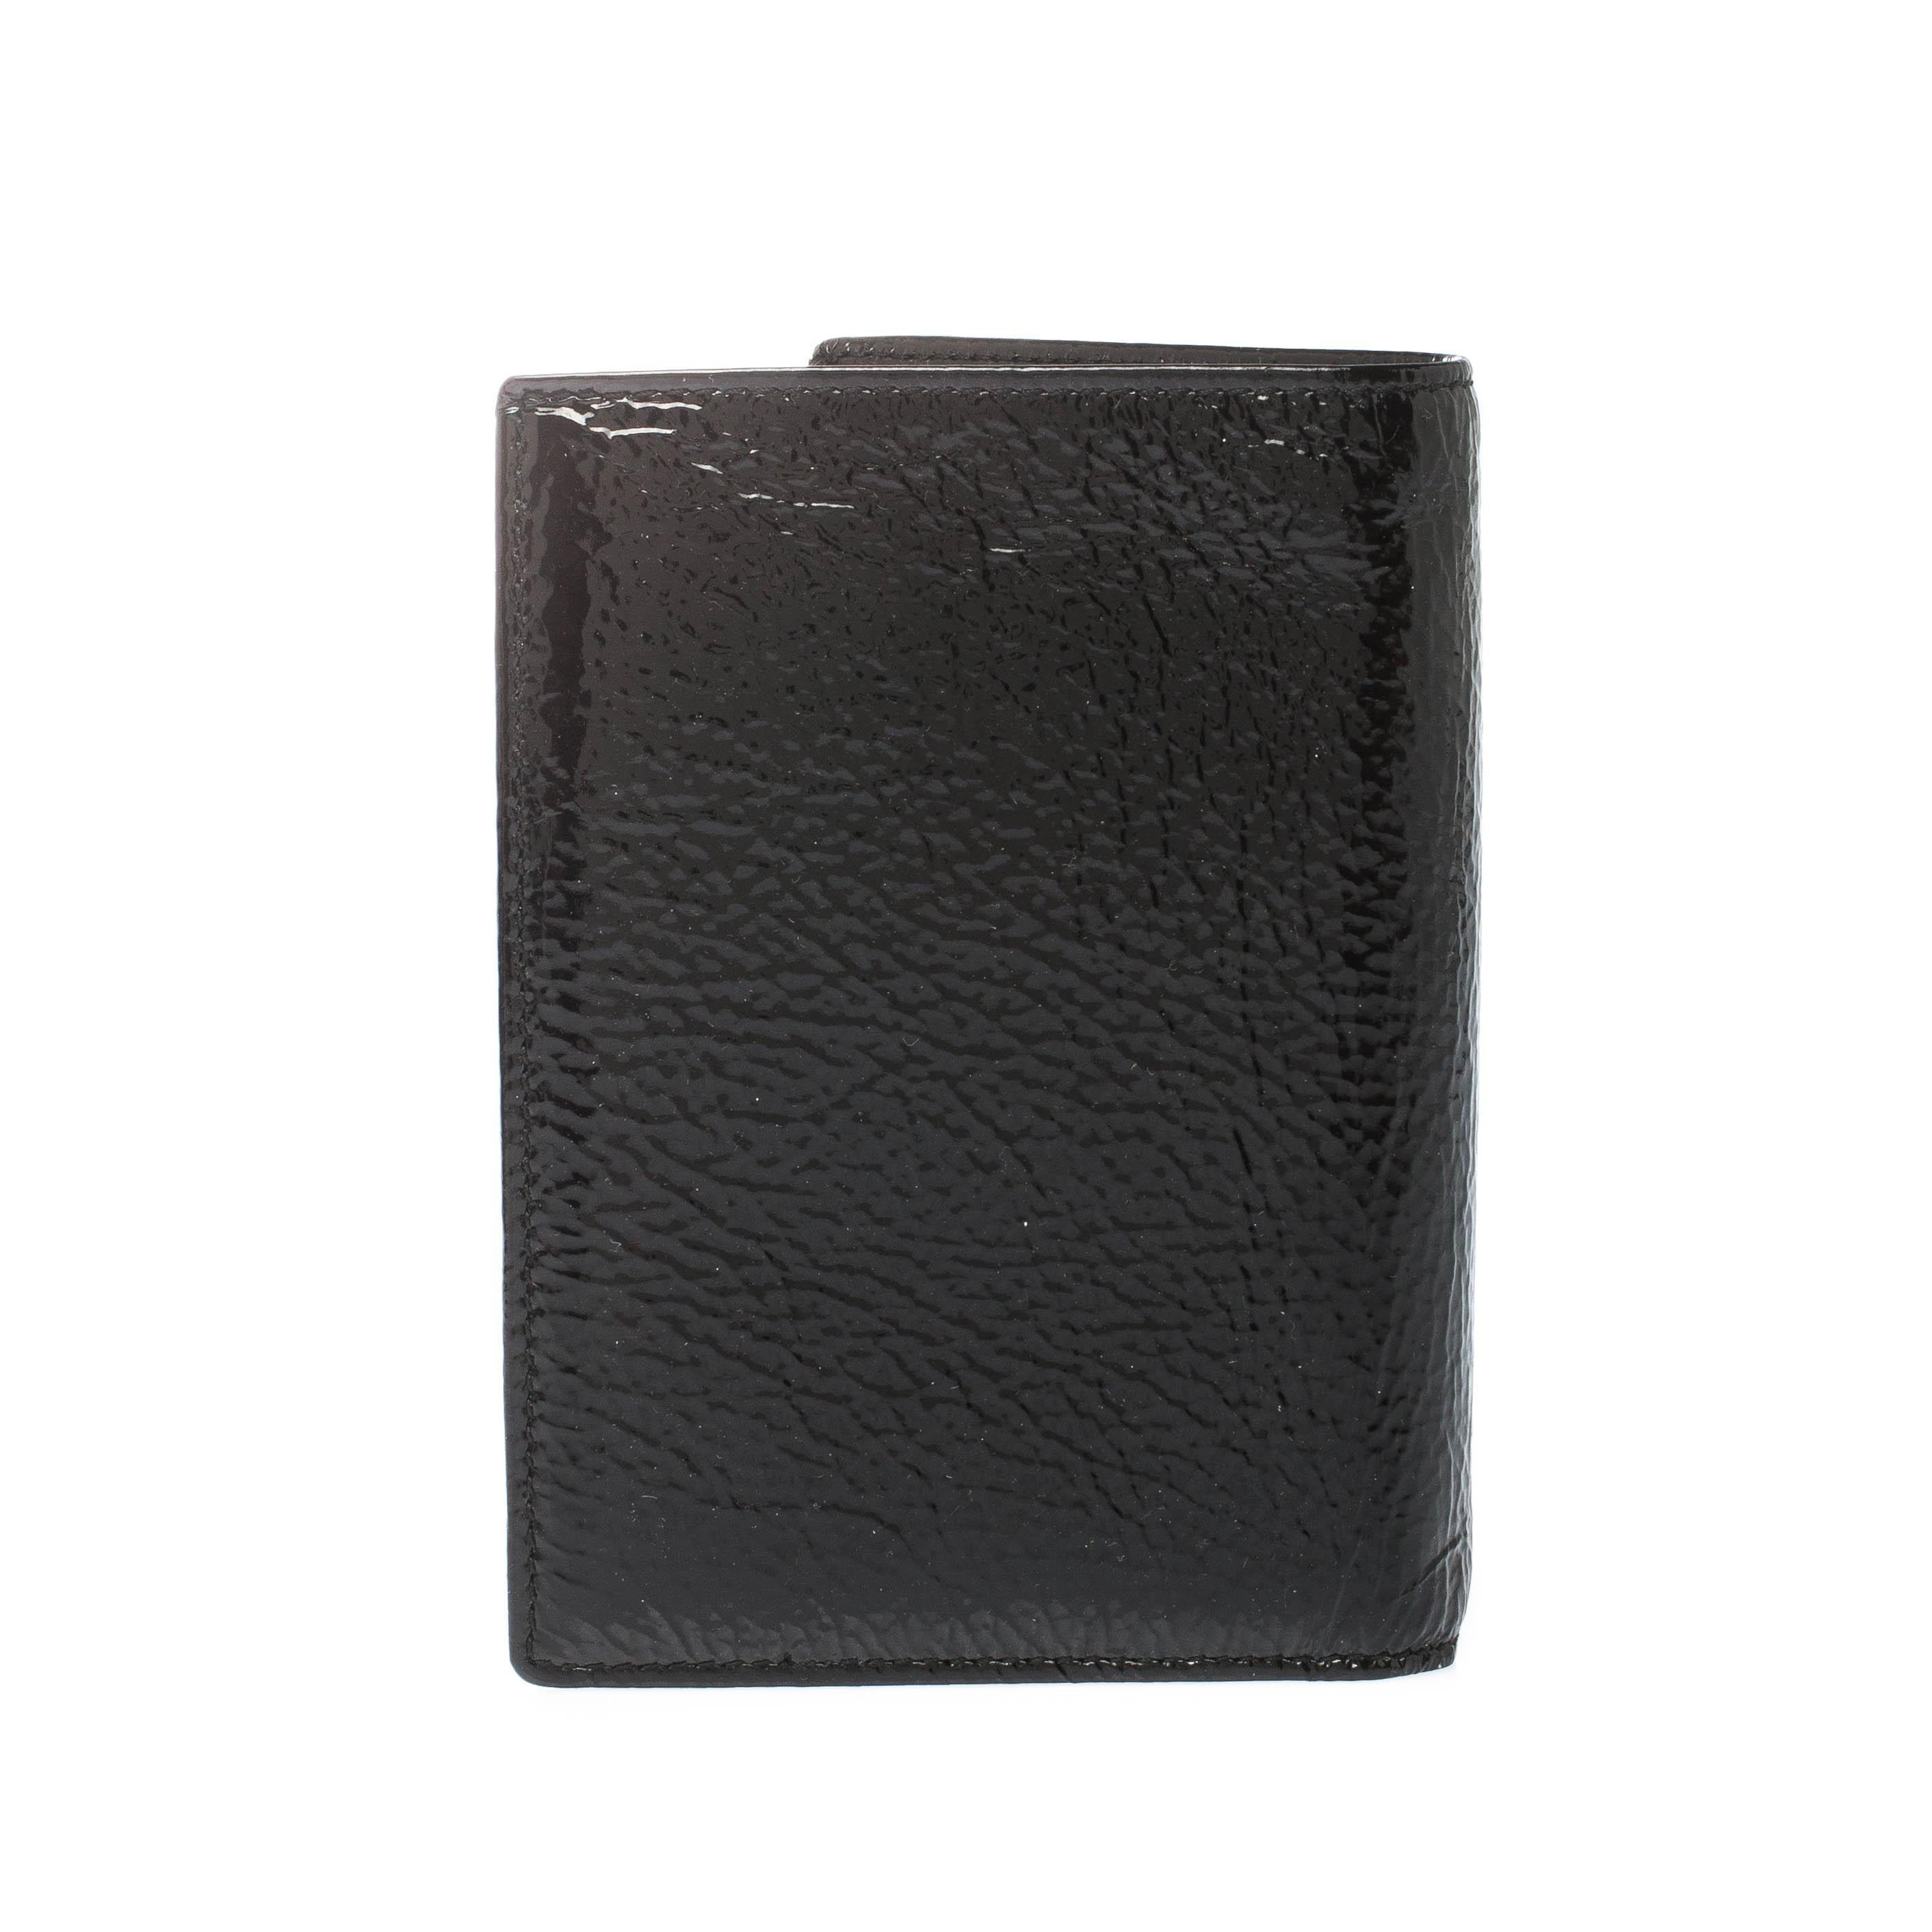 Wallets like this one from Saint Laurent are not only functional but also stylish. Crafted from patent leather this wallet comes as a bi-fold. It has the iconic YSL on the front and is equipped with multiple slots and enough space to neatly arrange